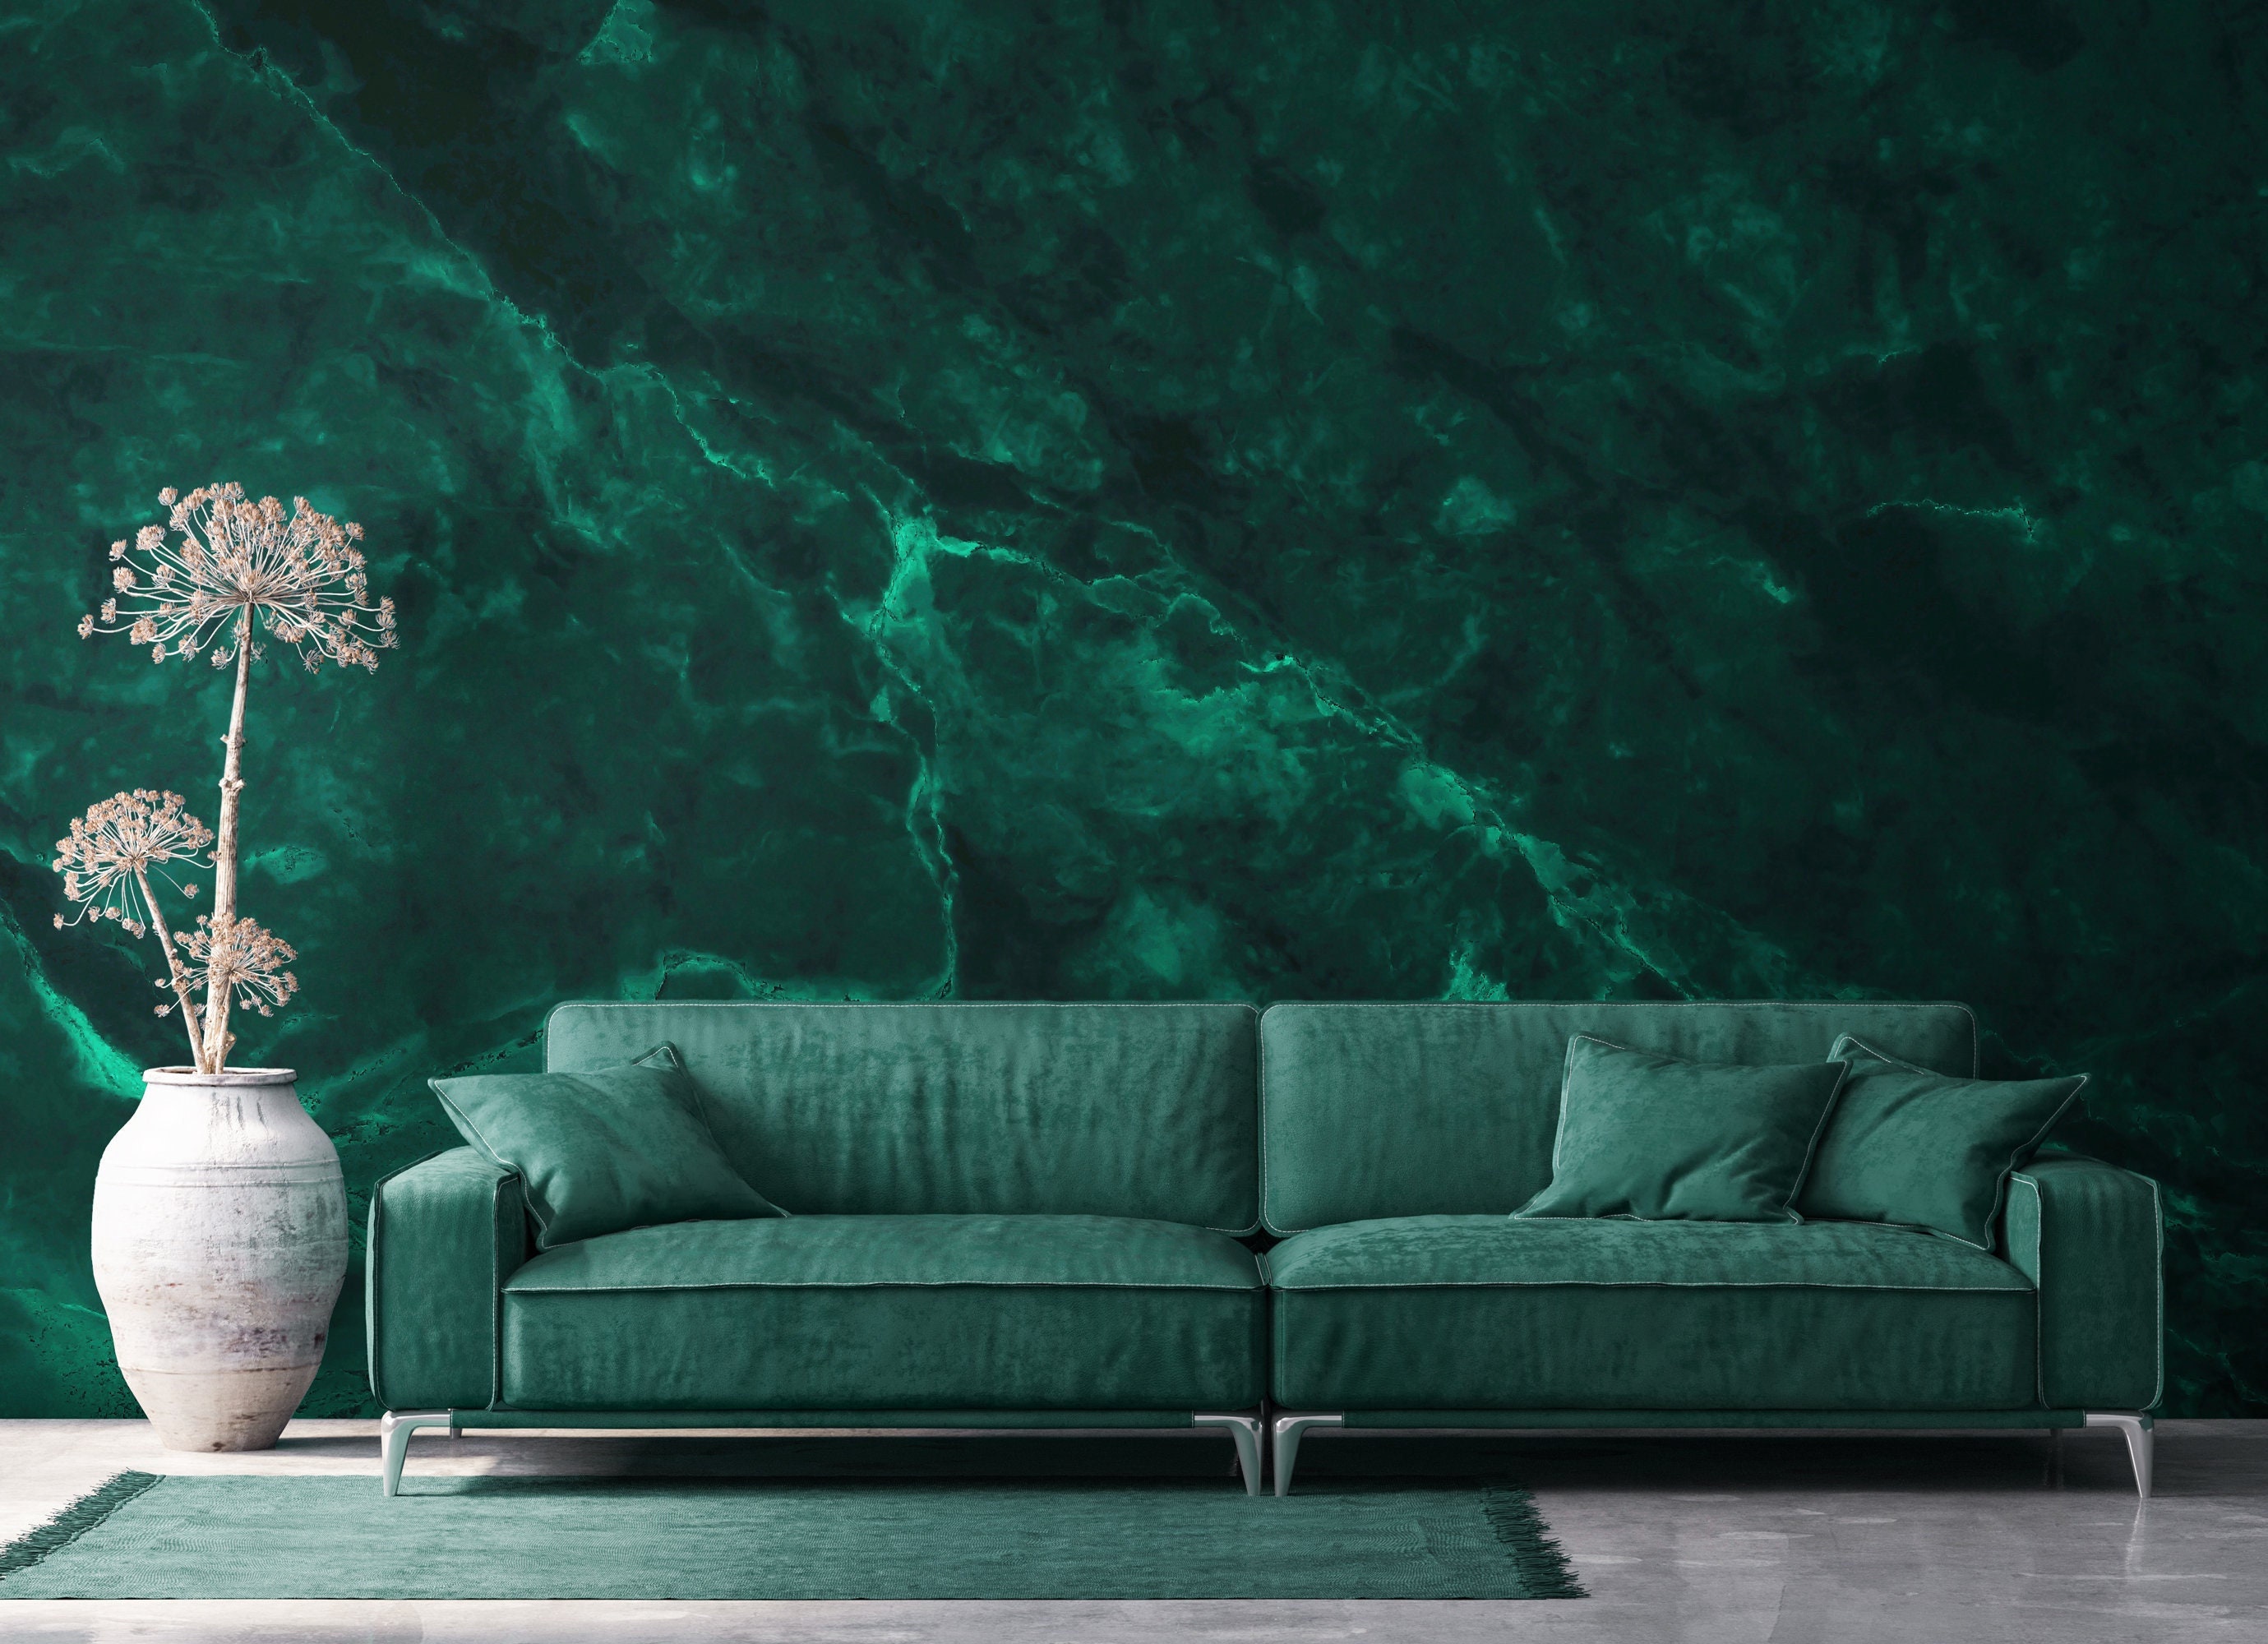 Emerald Green Marble Wallpaper Peel and Stick Removable - Etsy